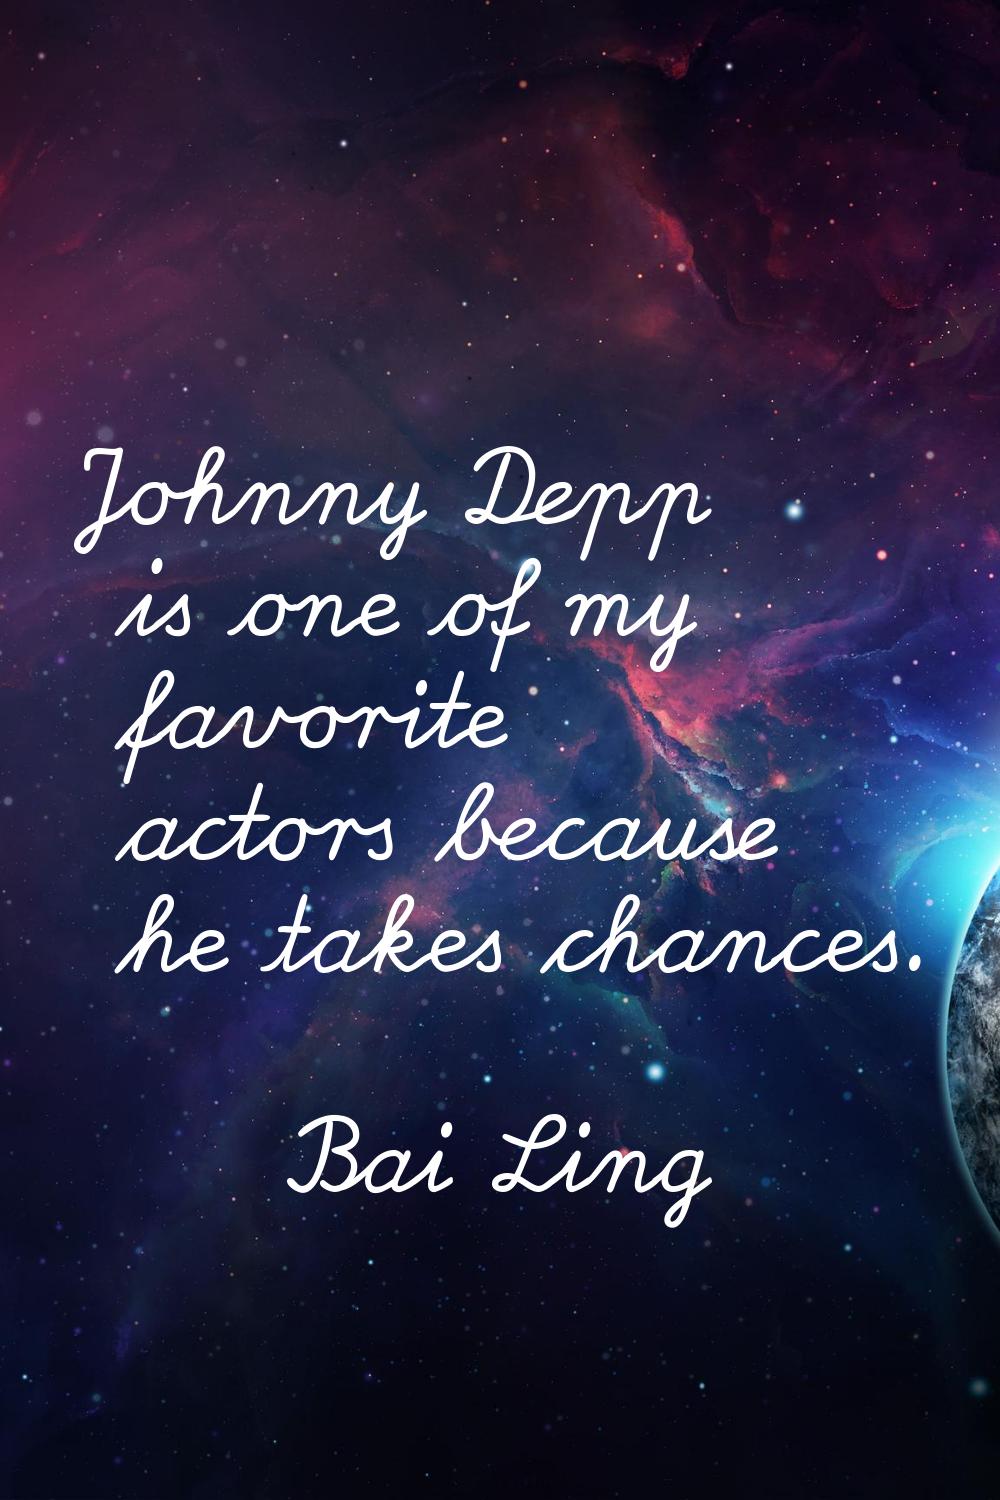 Johnny Depp is one of my favorite actors because he takes chances.